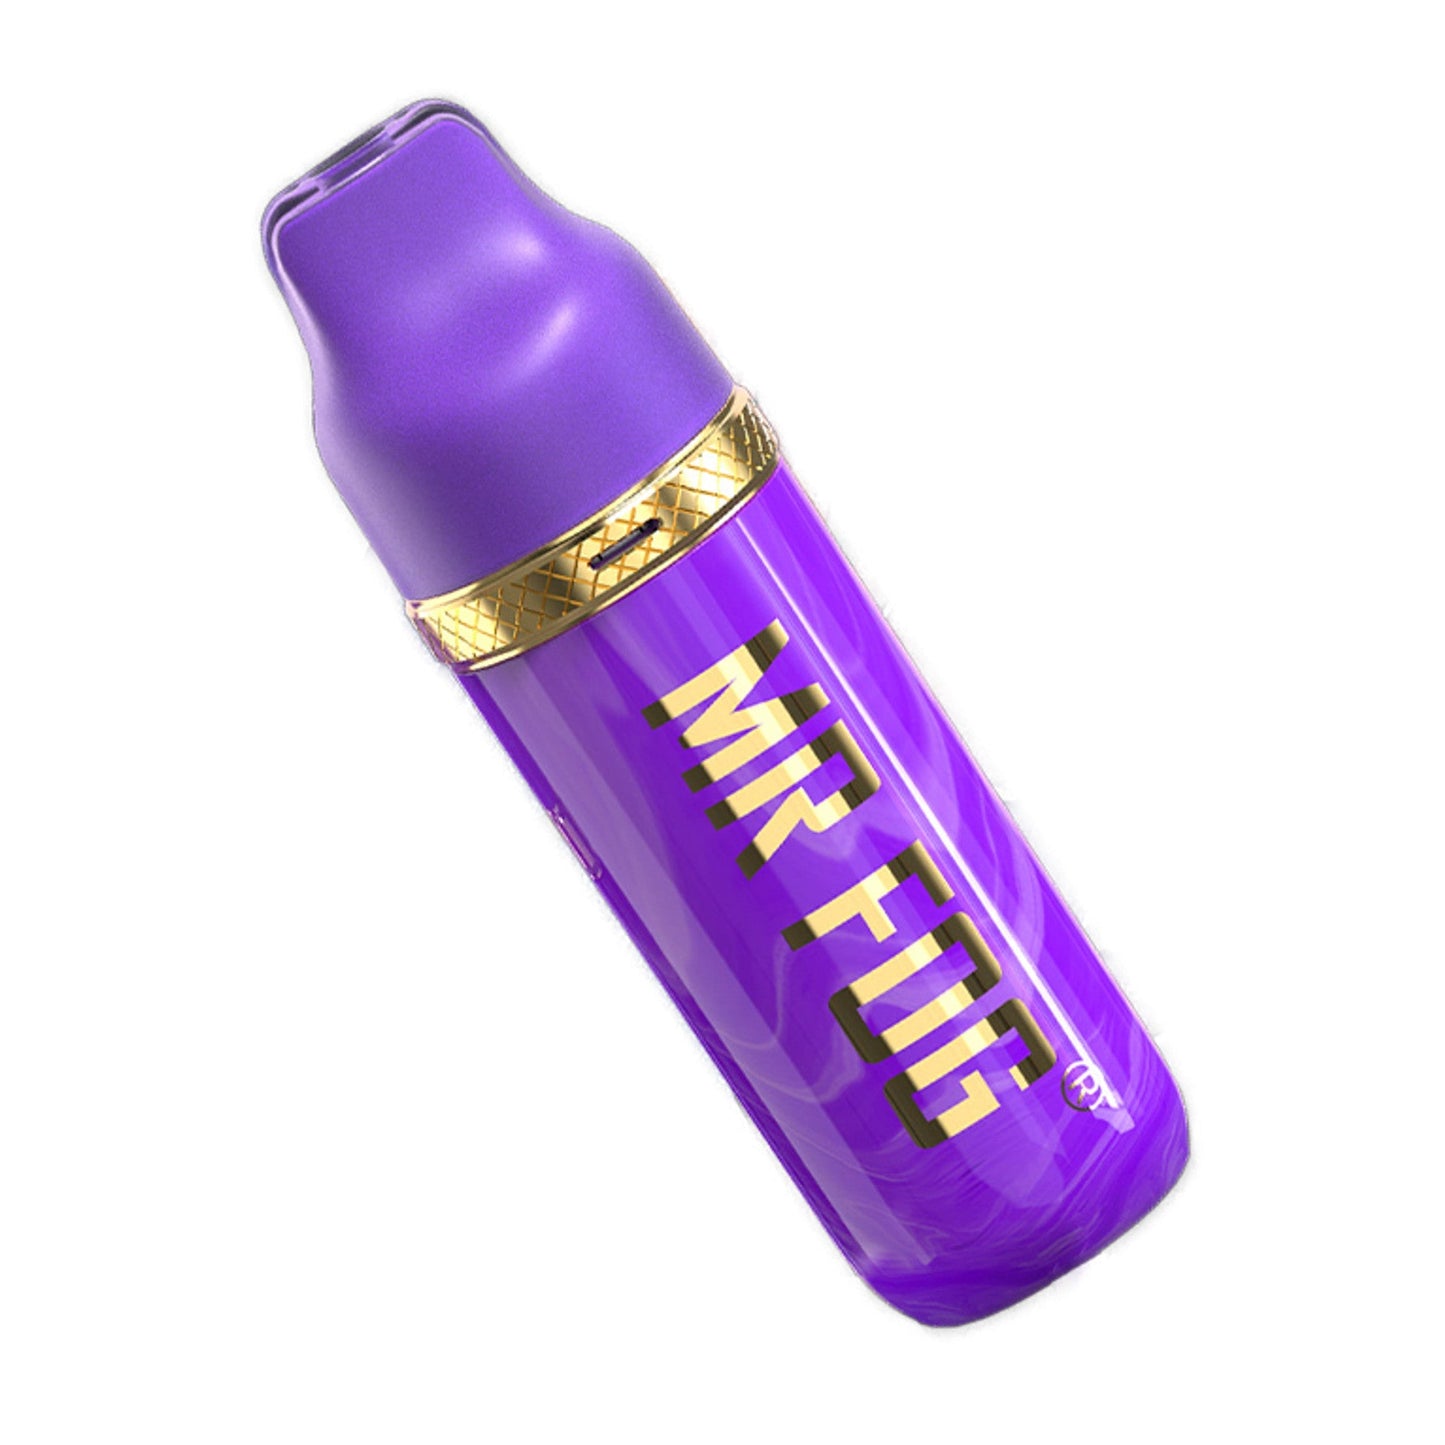 Mr fog Max Air MA8500 Disposable Vape | PACK OF 10